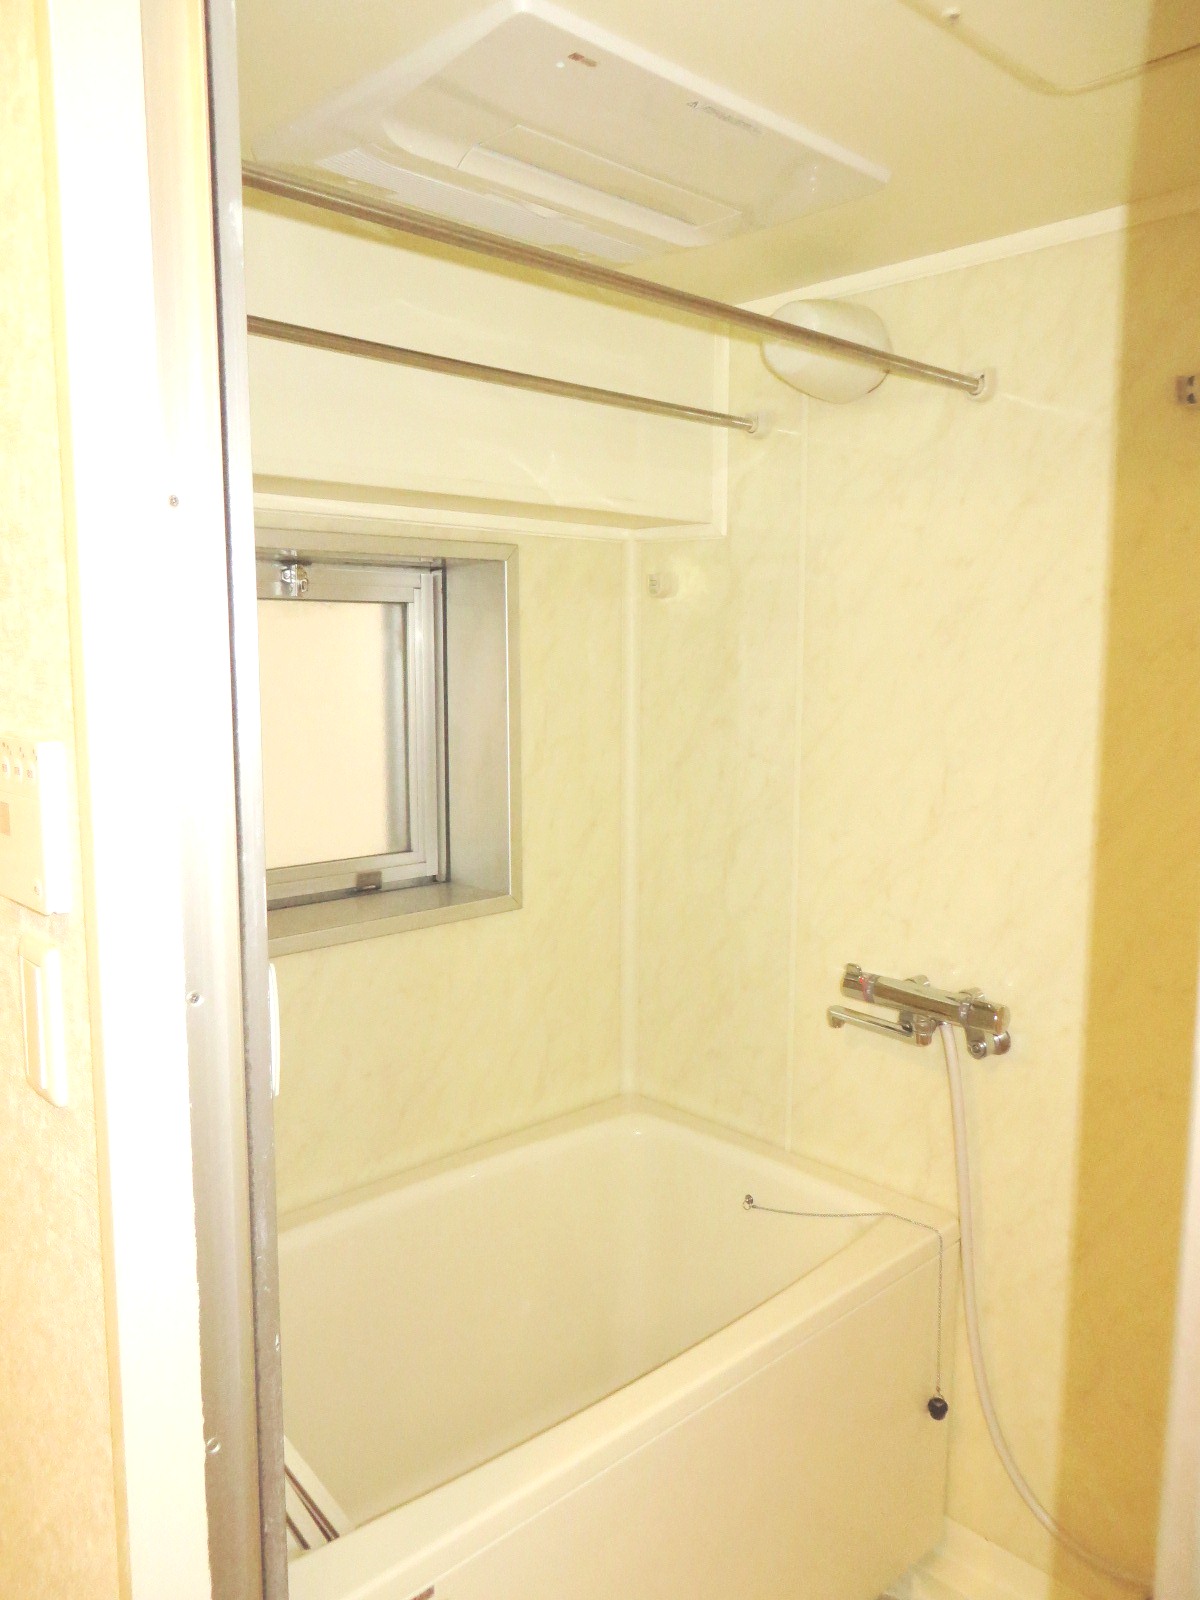 Bath. With bathroom ventilation dryer Is good ventilation because there is a window